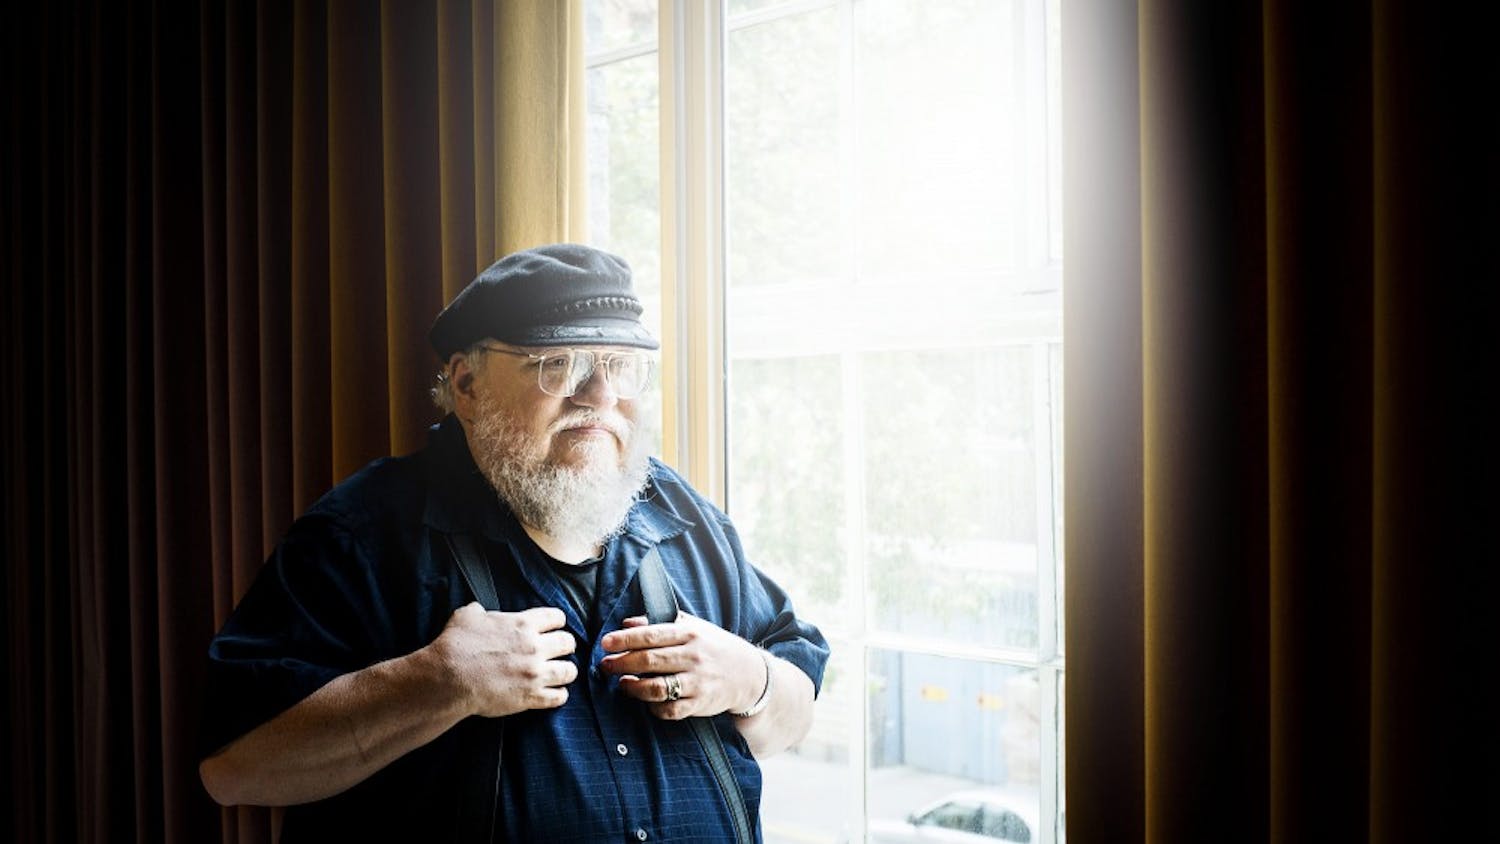 American novelist George R.R Martin, author of Game of Thrones, poses for a portrait on June 22, 2015 in Stockholm, Sweden. (Ola Axman/IBL/Abaca Press/TNS) 